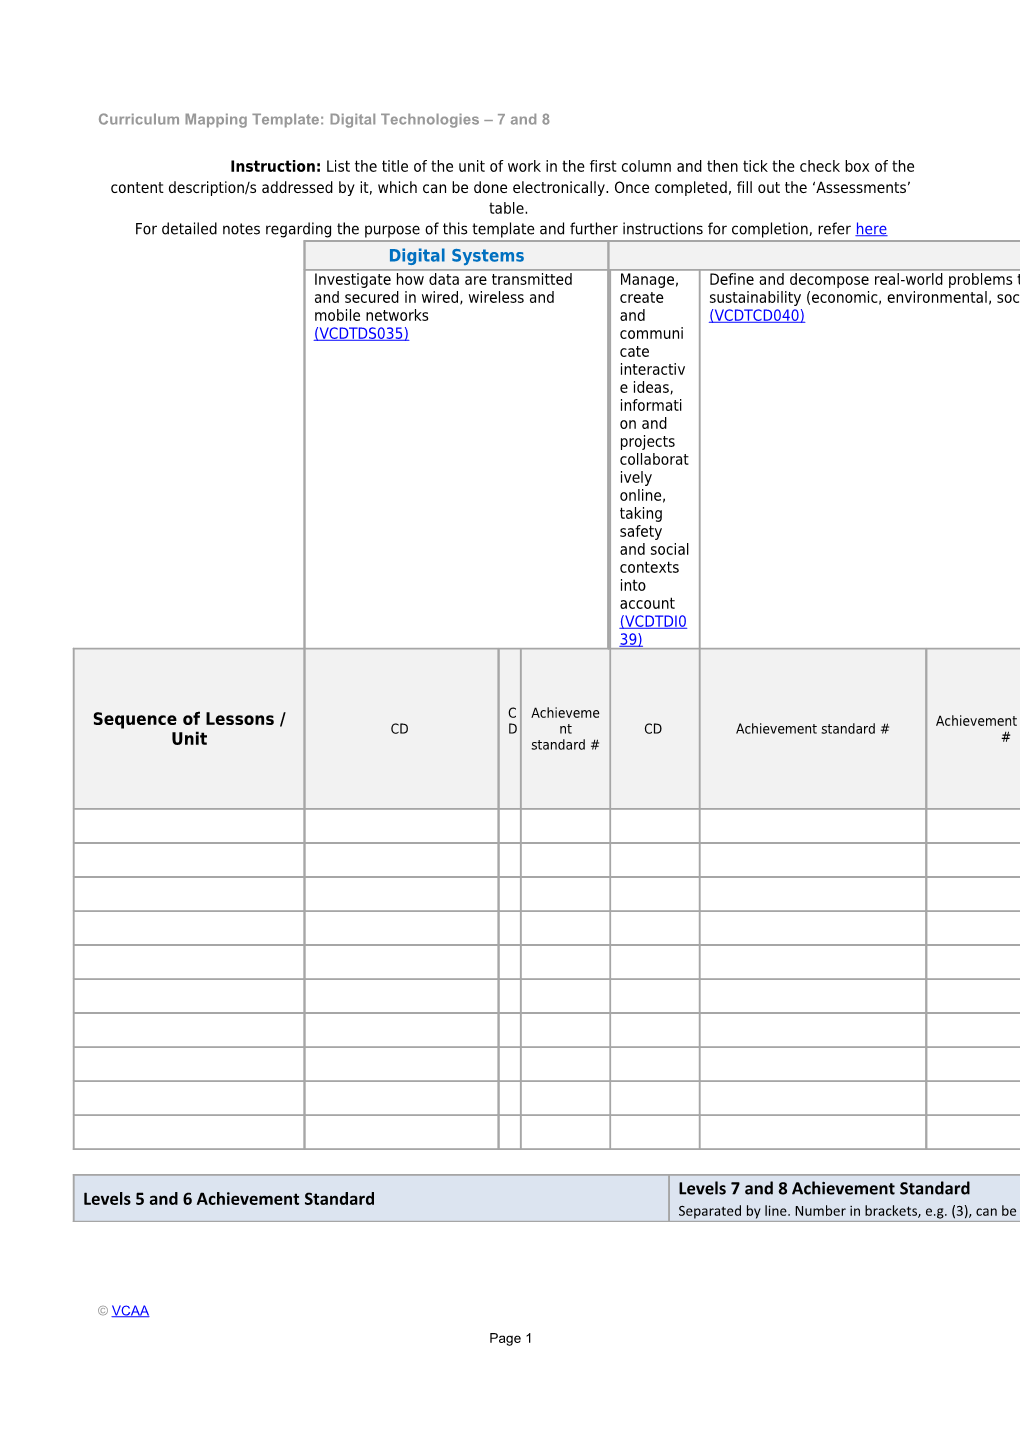 Curriculum Mapping Template: Digital Technologies 7 and 8